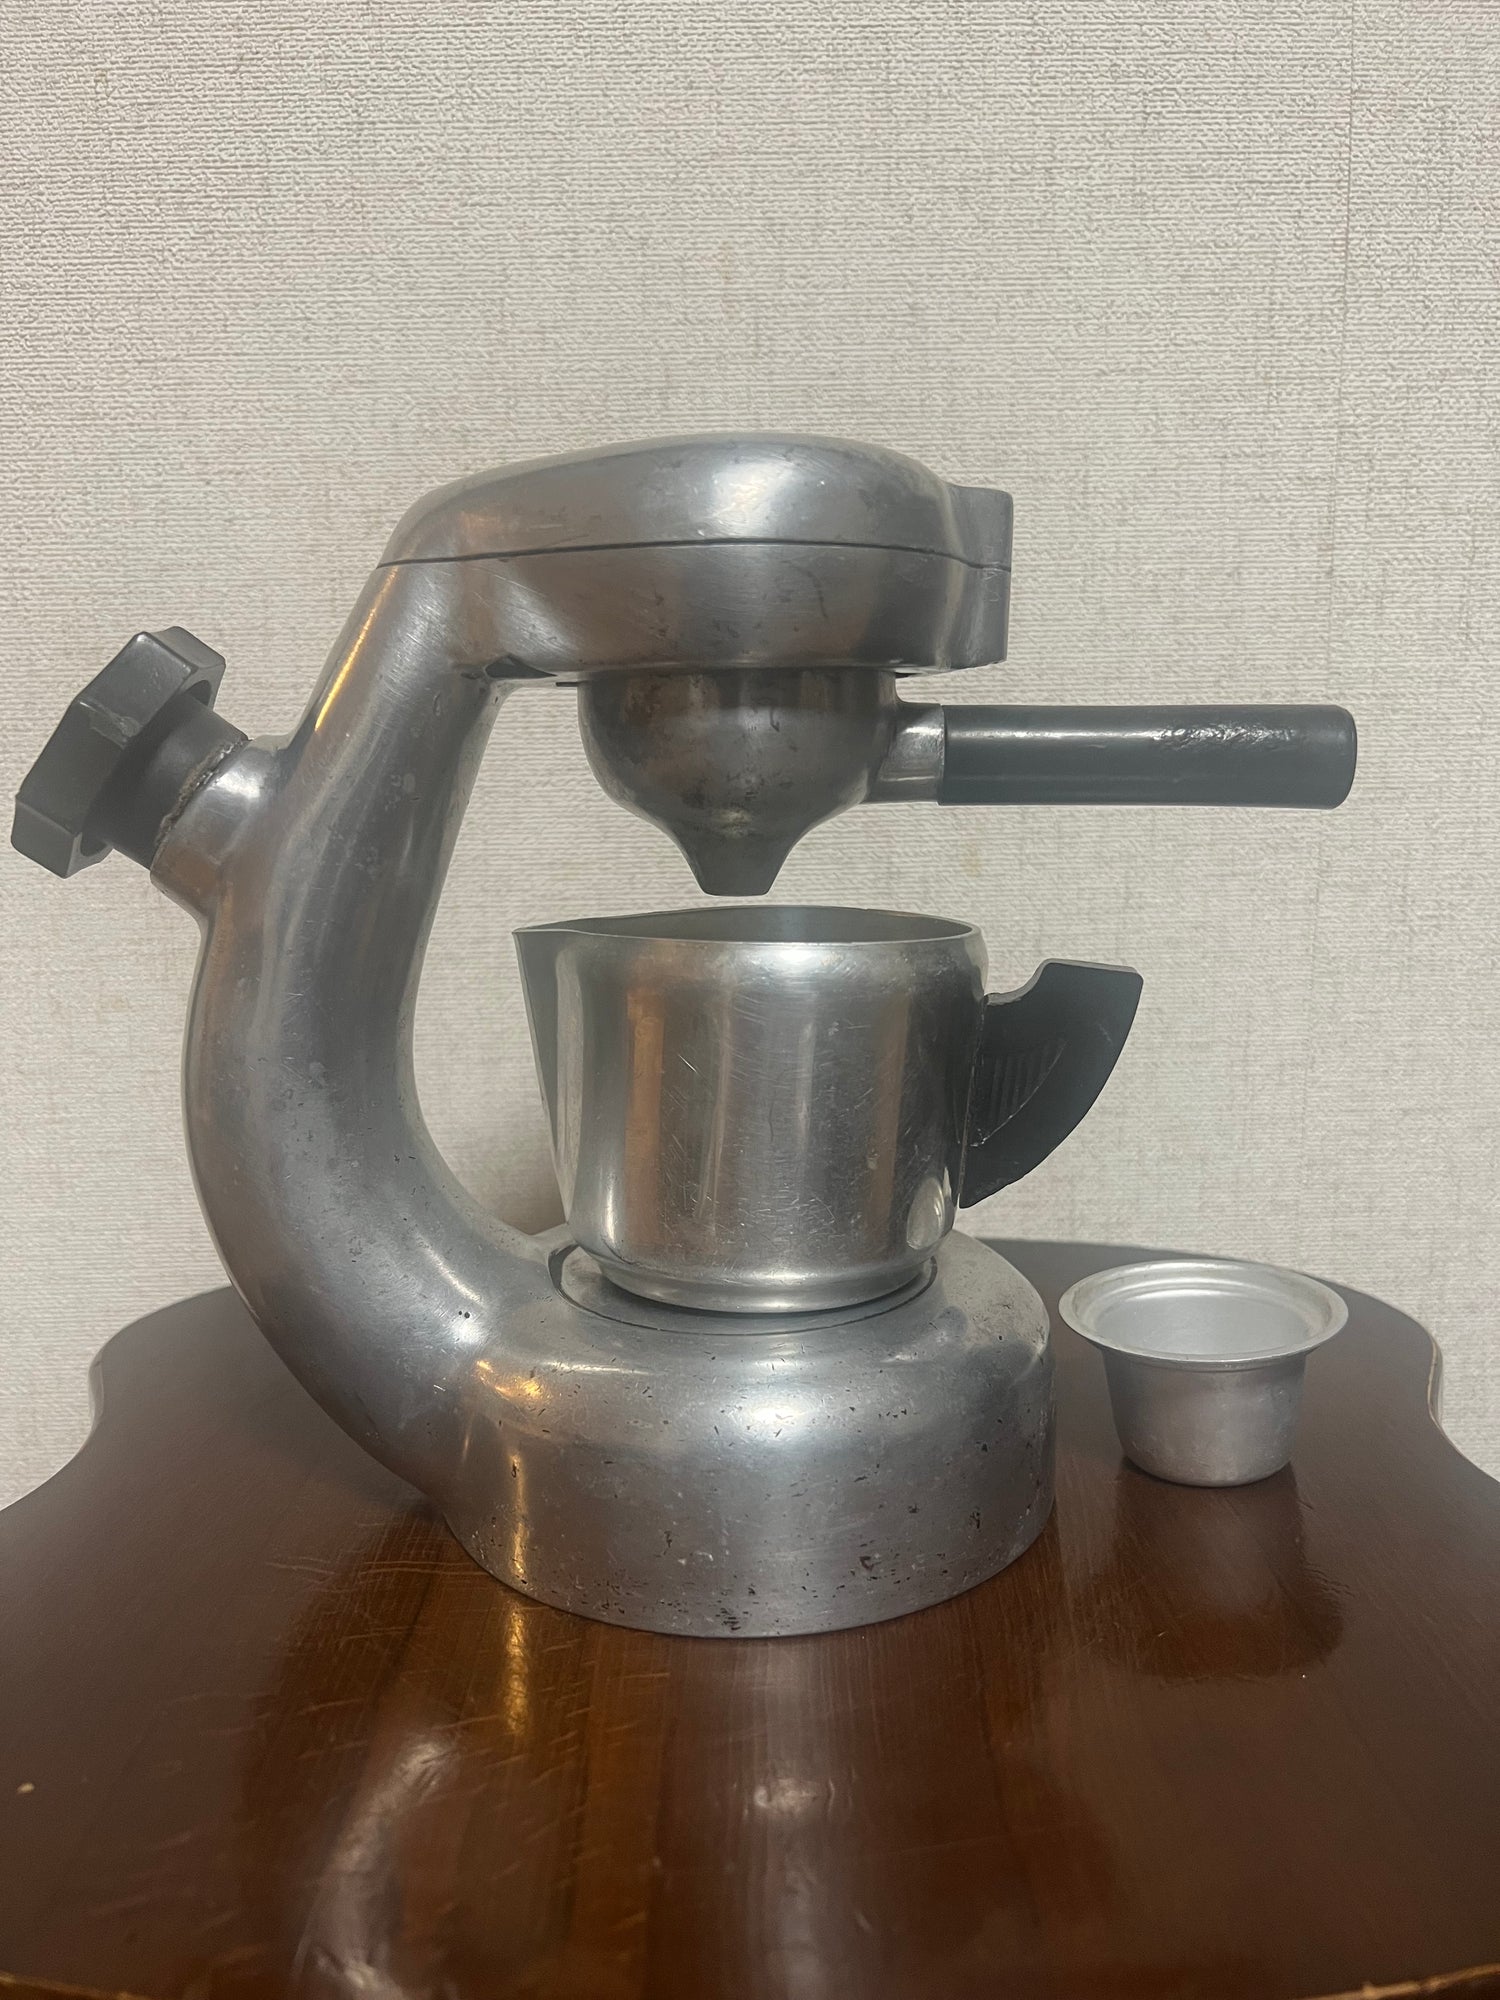 ☆ATOMIC Coffee Maker vintage made in ハンガリー エスプレッソ